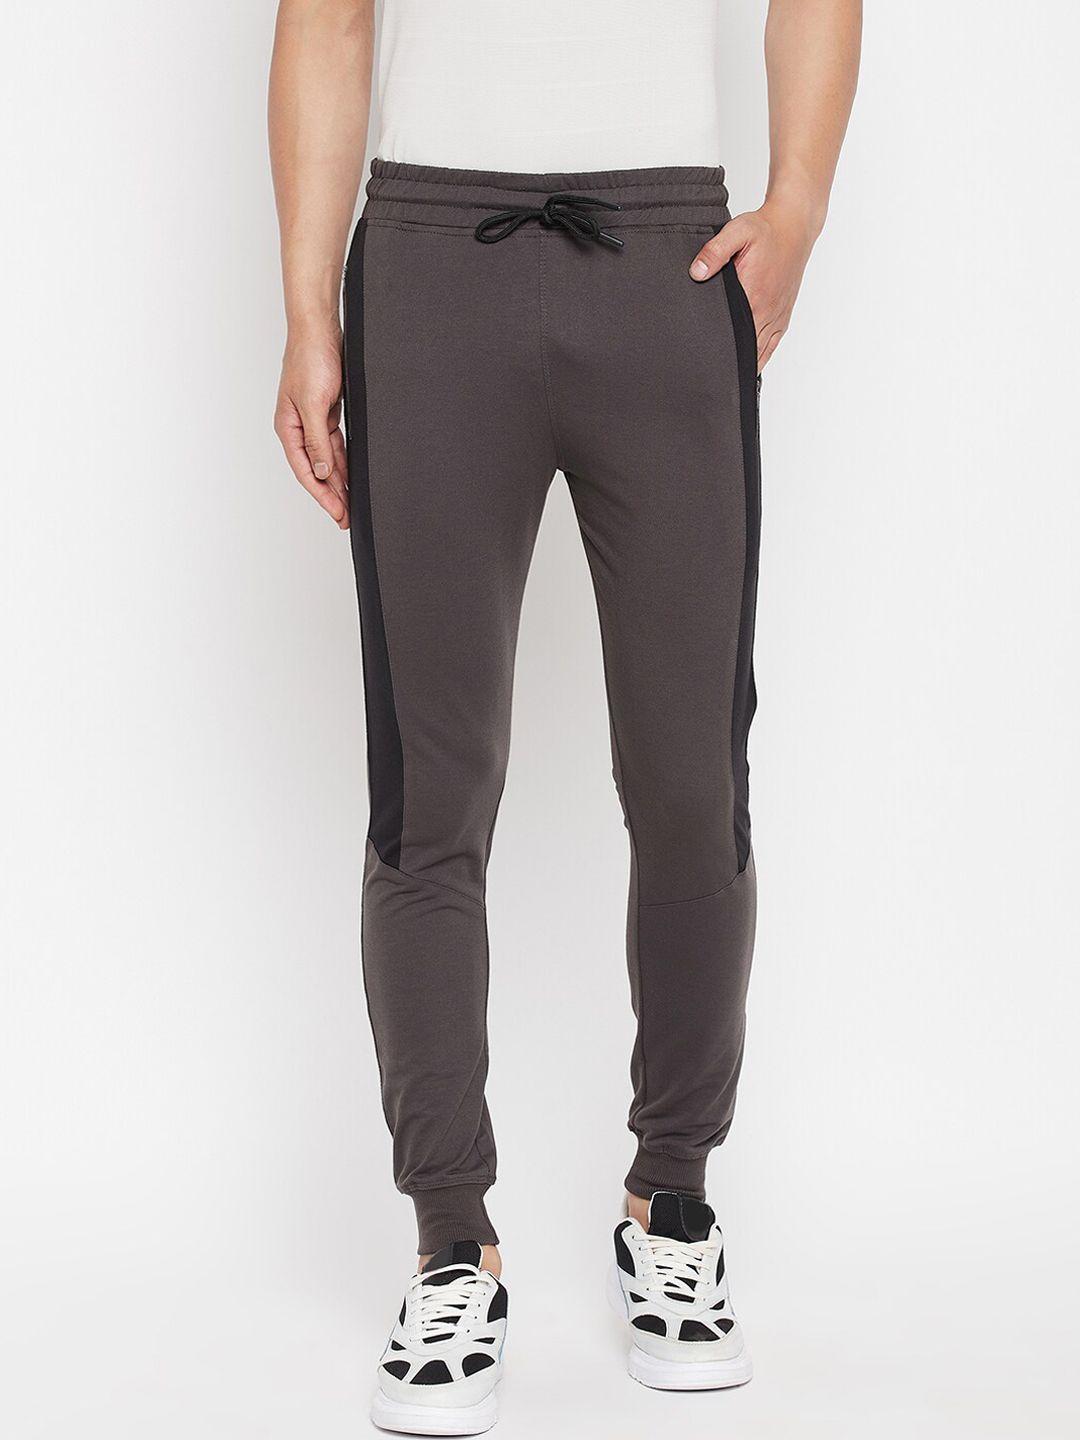 firstkrush men charcoal grey solid cotton joggers